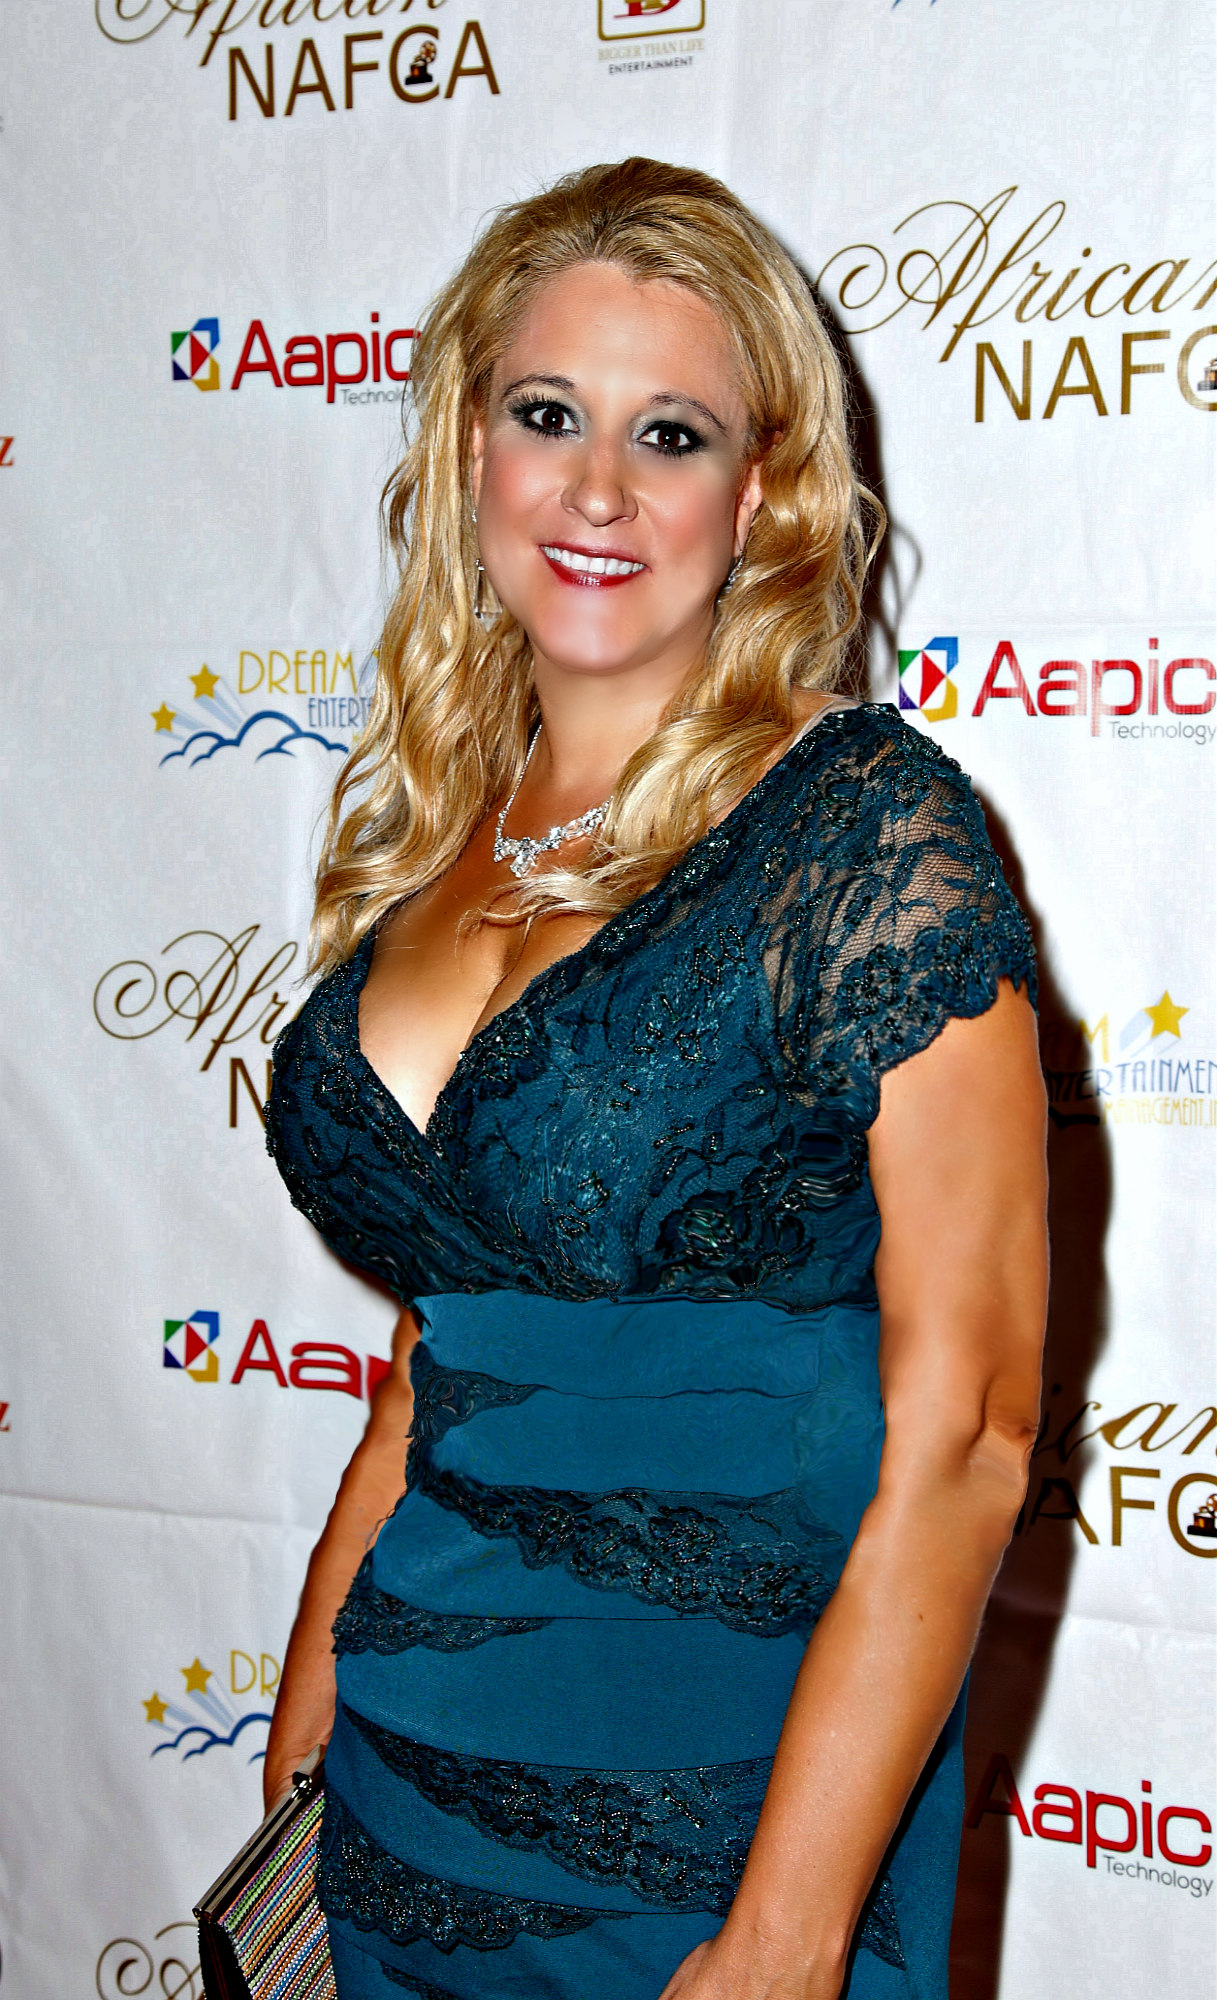 On the Red Carpet at the Orpheum Theater in Los Angeles, CA Nominated for a NAFCA (African Oscar) Award